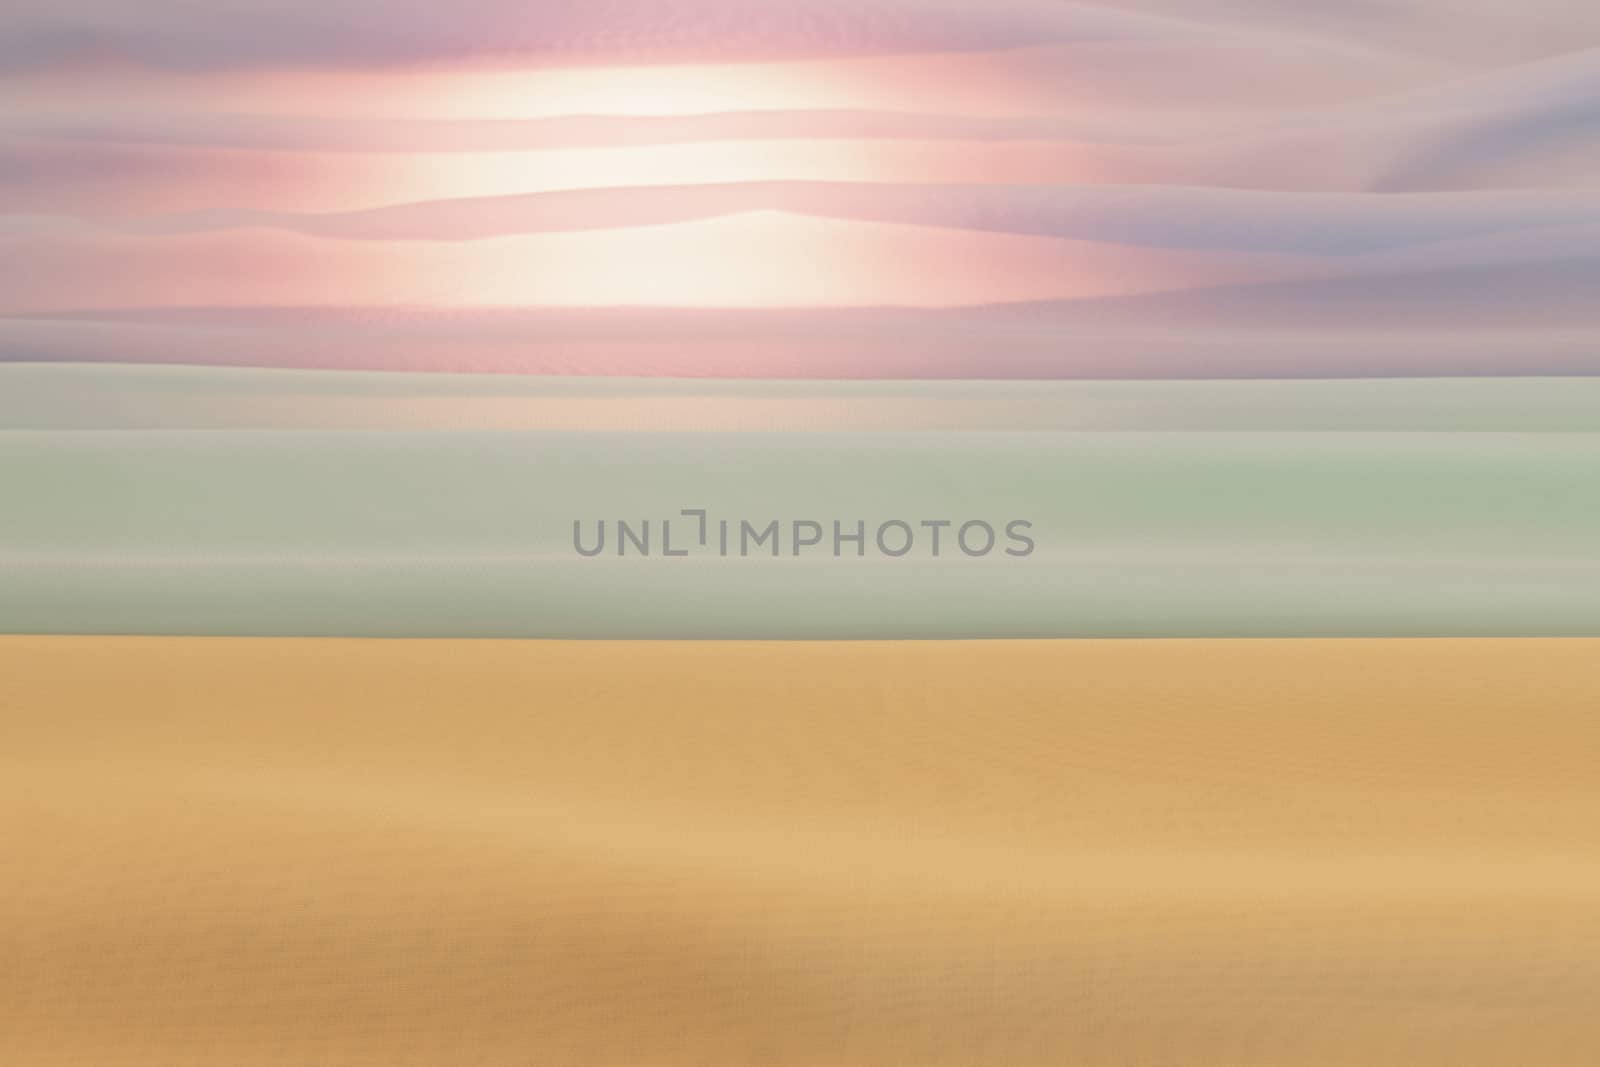 Abstract view of a beach landscape through towels
 by Tofotografie